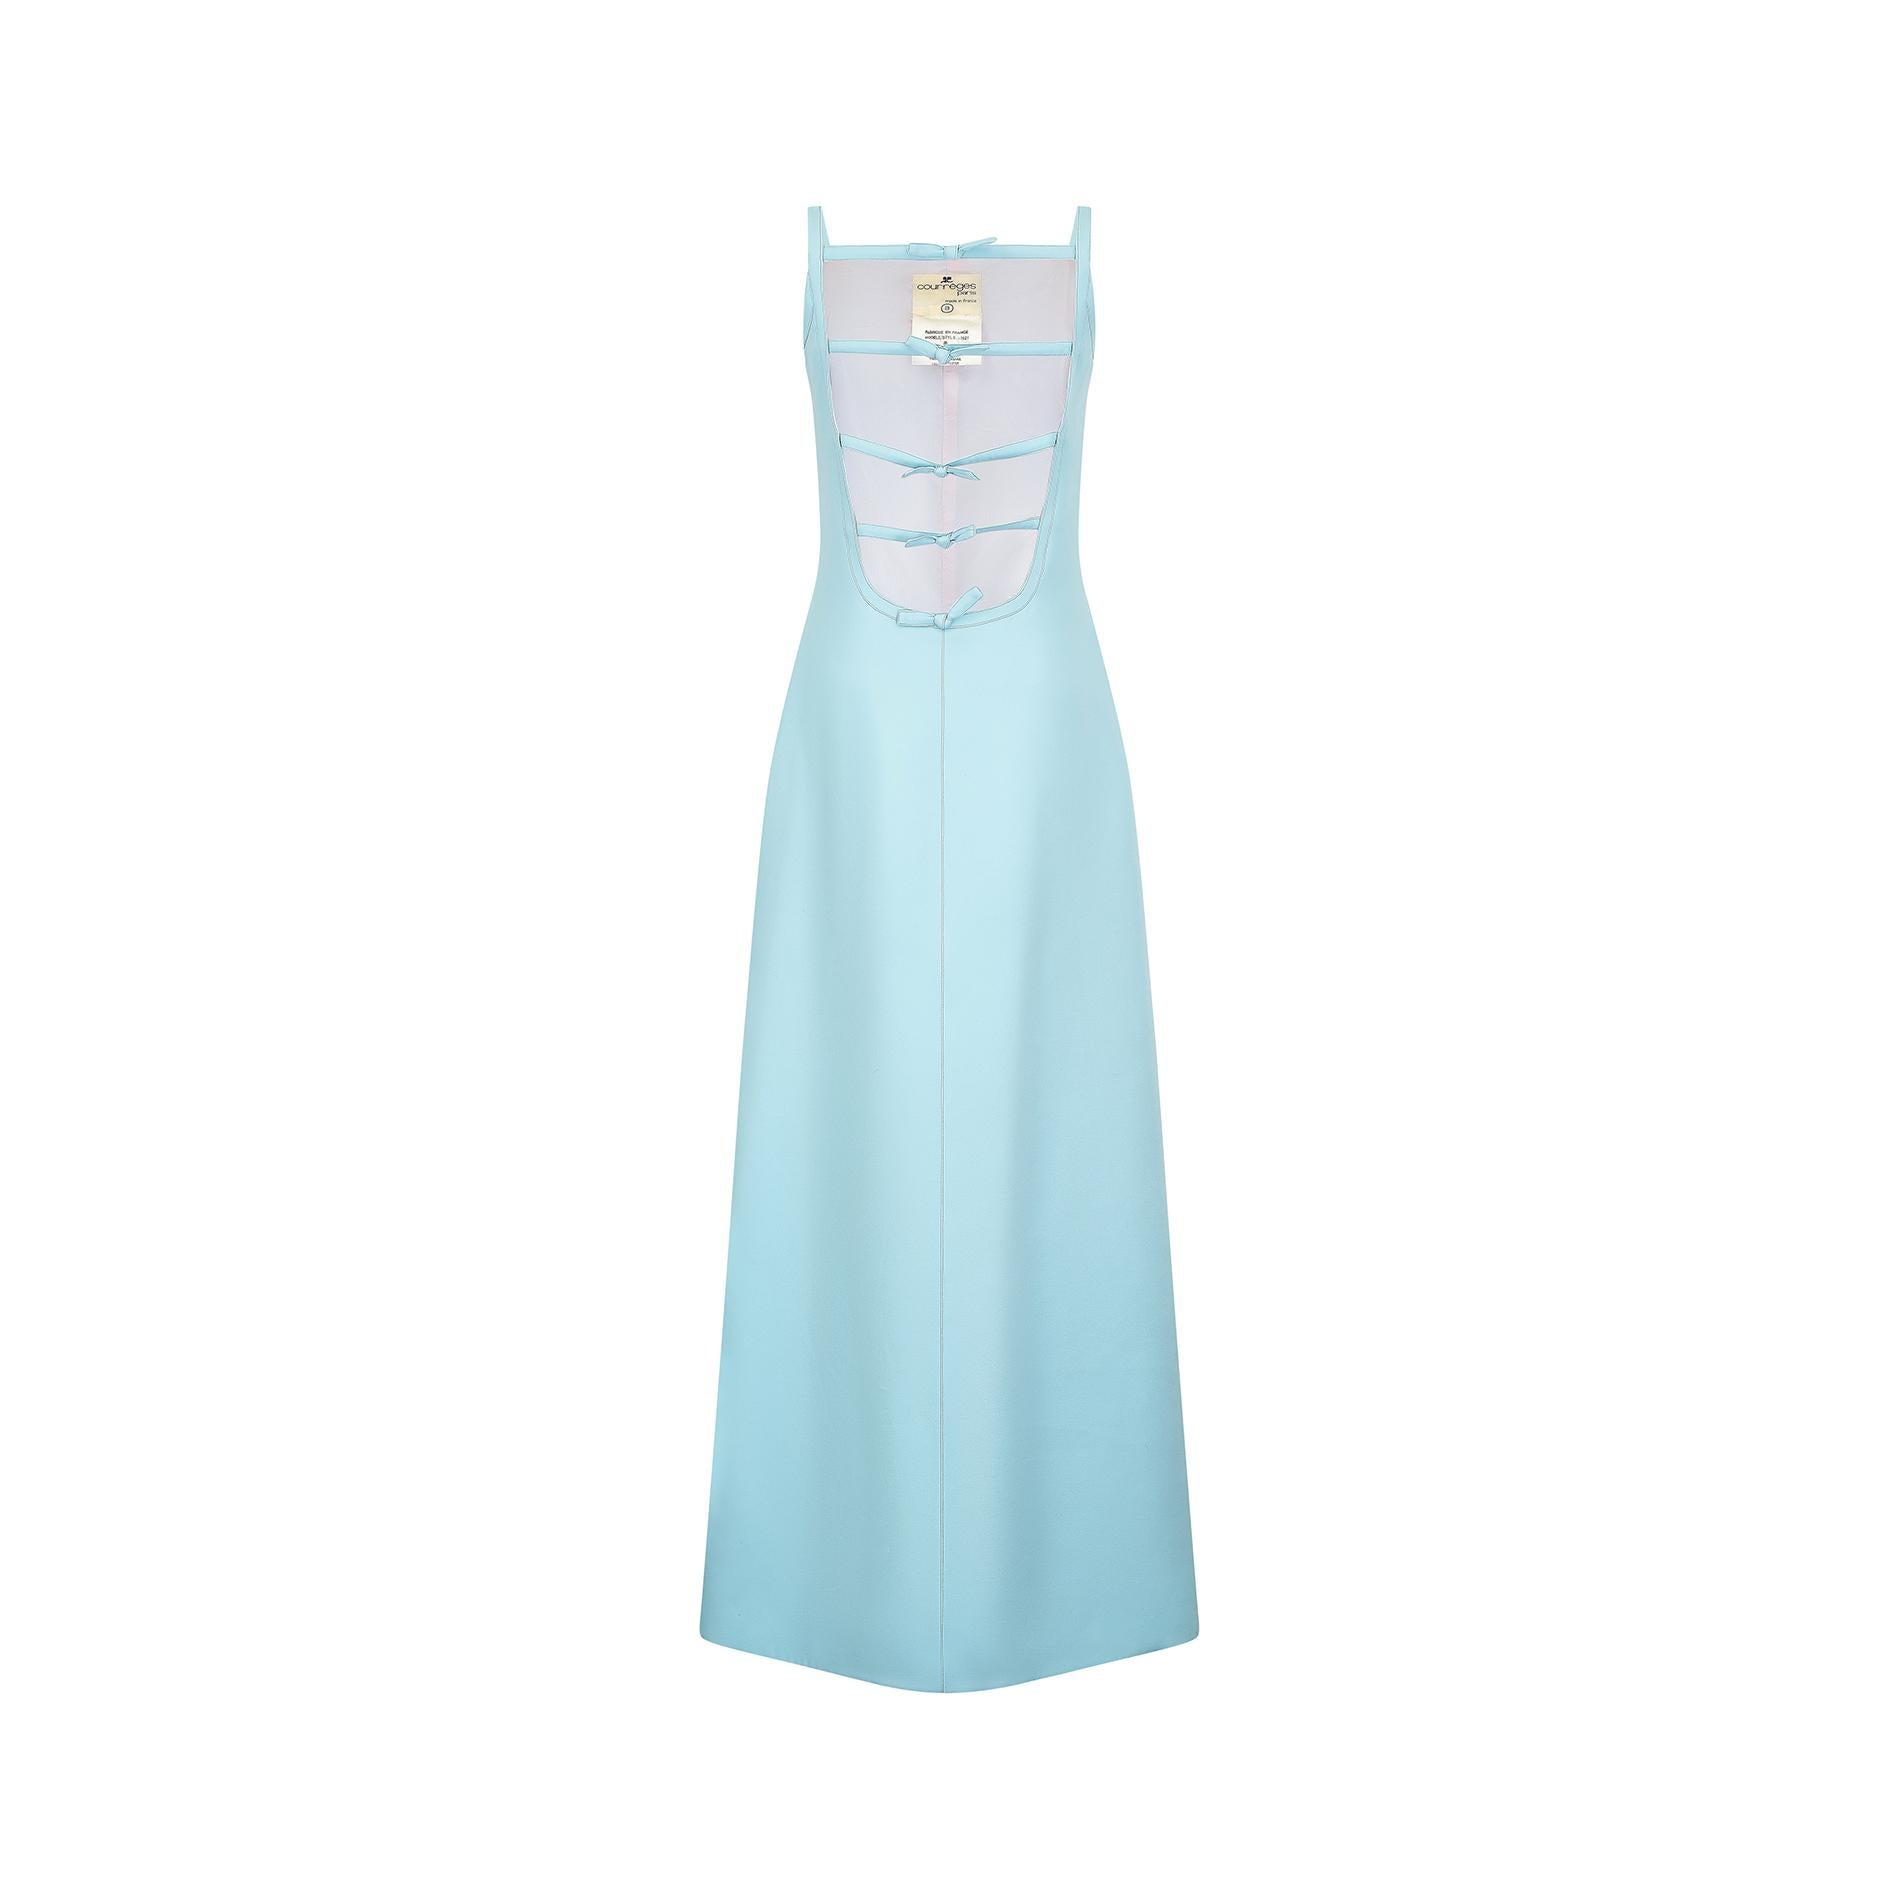 1971 Documented Courreges Turquoise Maxi Dress In Excellent Condition For Sale In London, GB